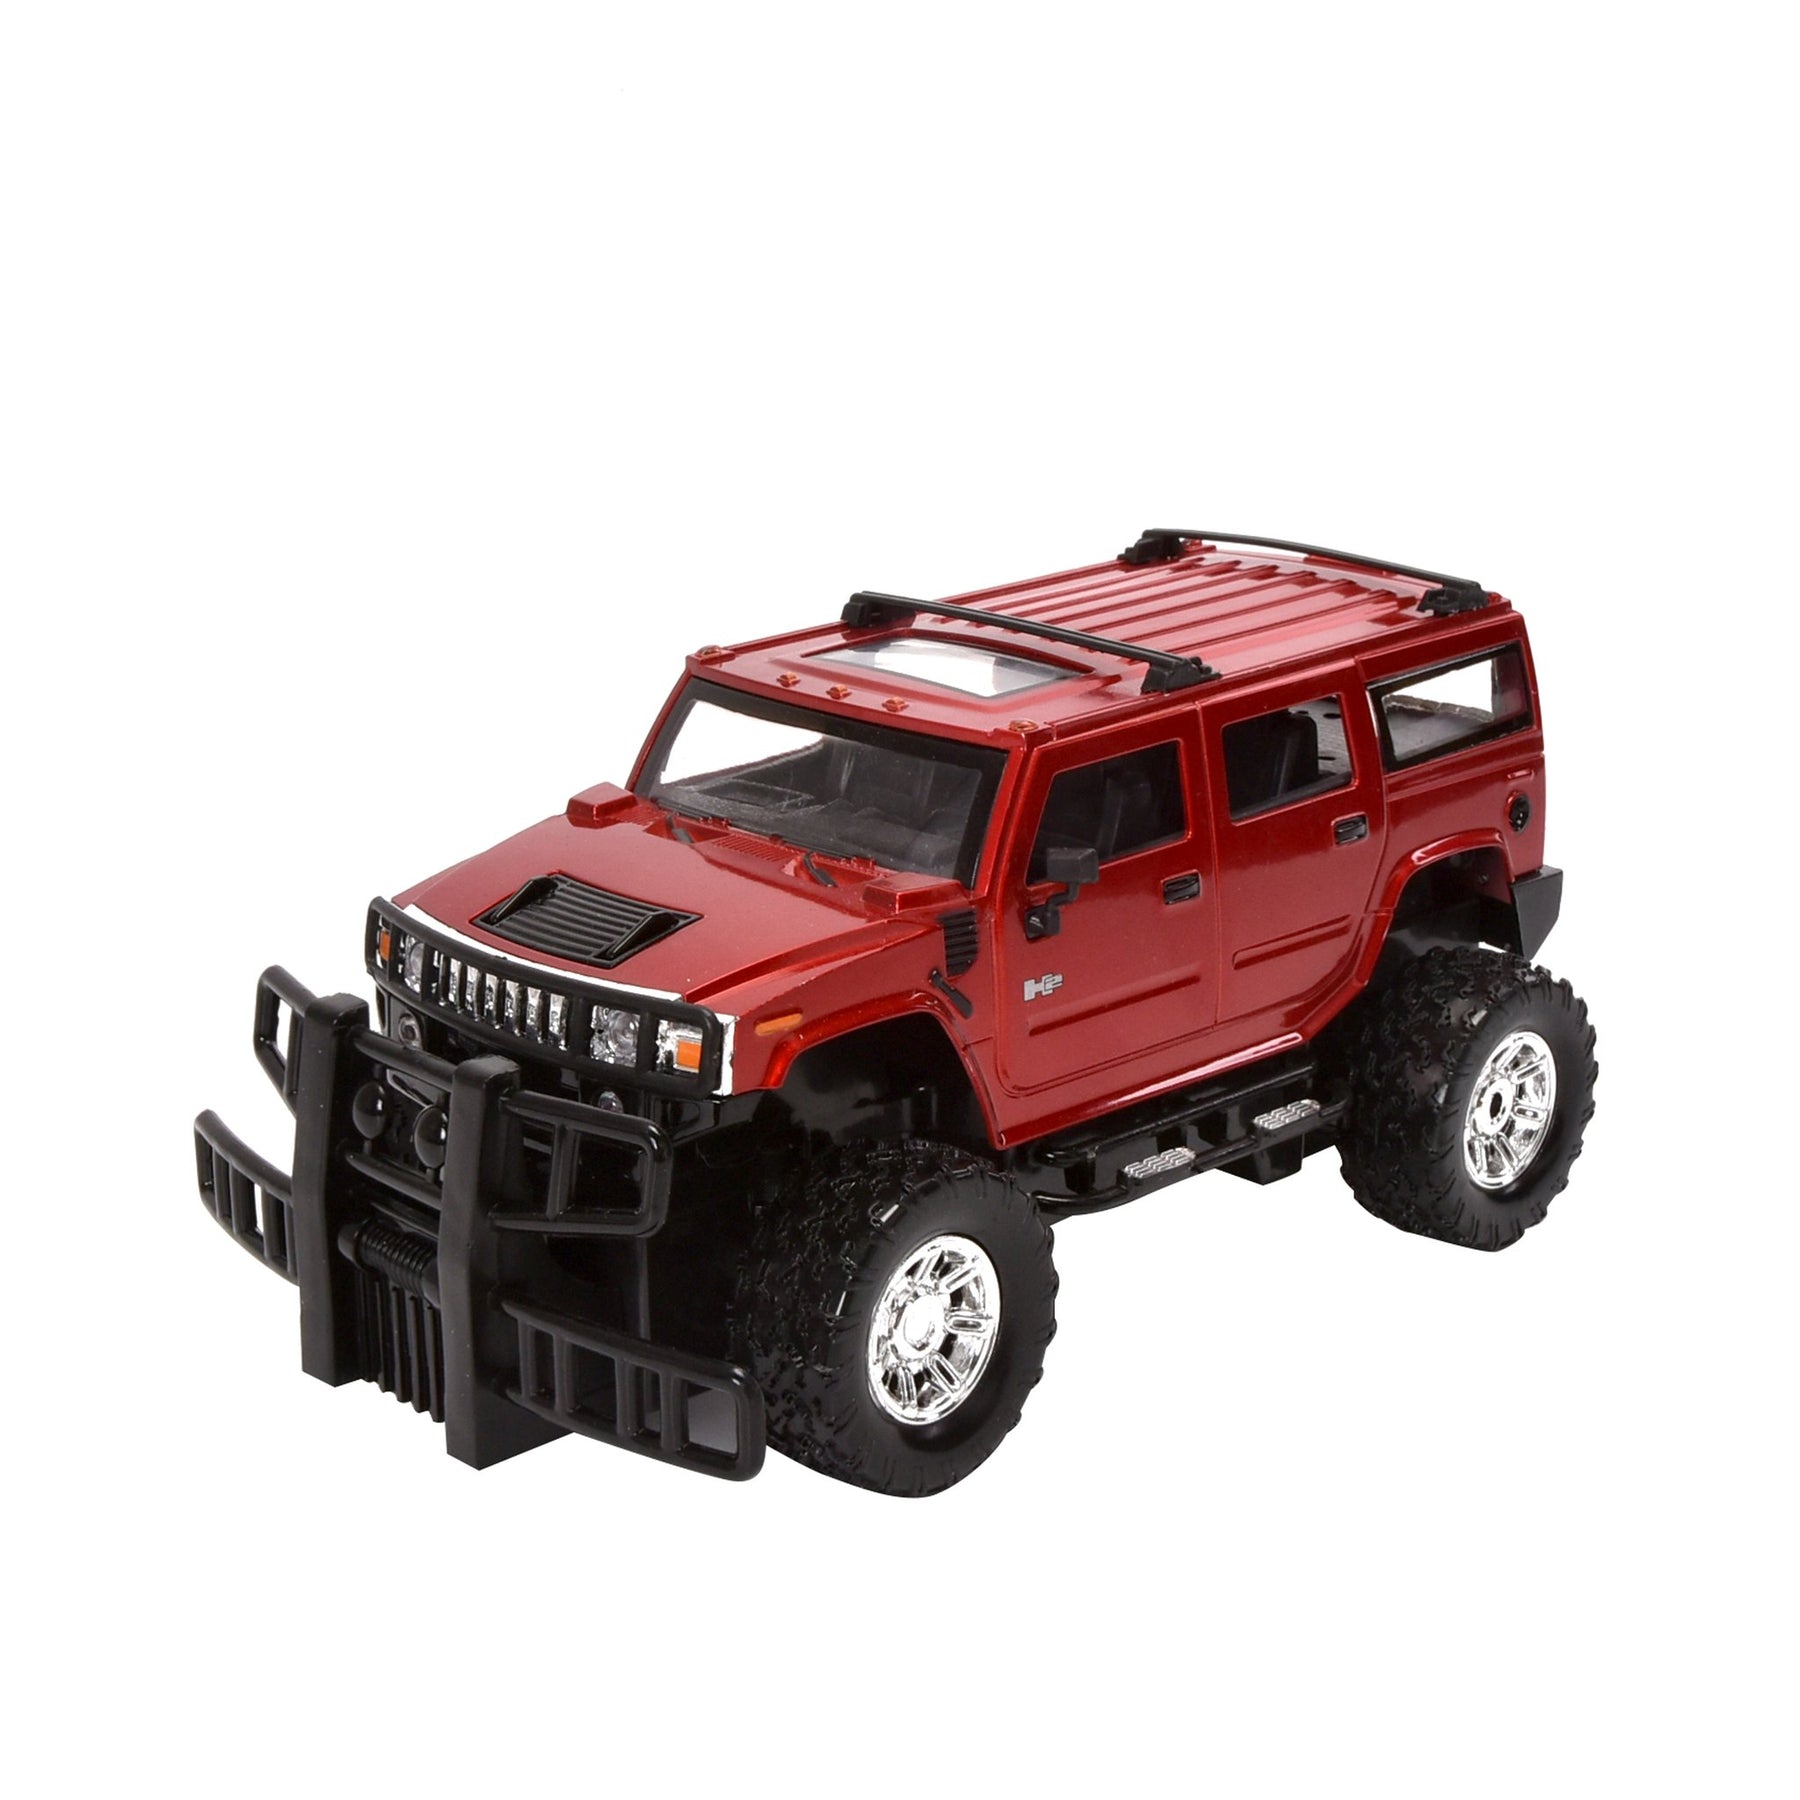 GK Racer 1:24 Scale Hummer H2 SUV Remote Control Car, Lights, Red/Yellow/Black